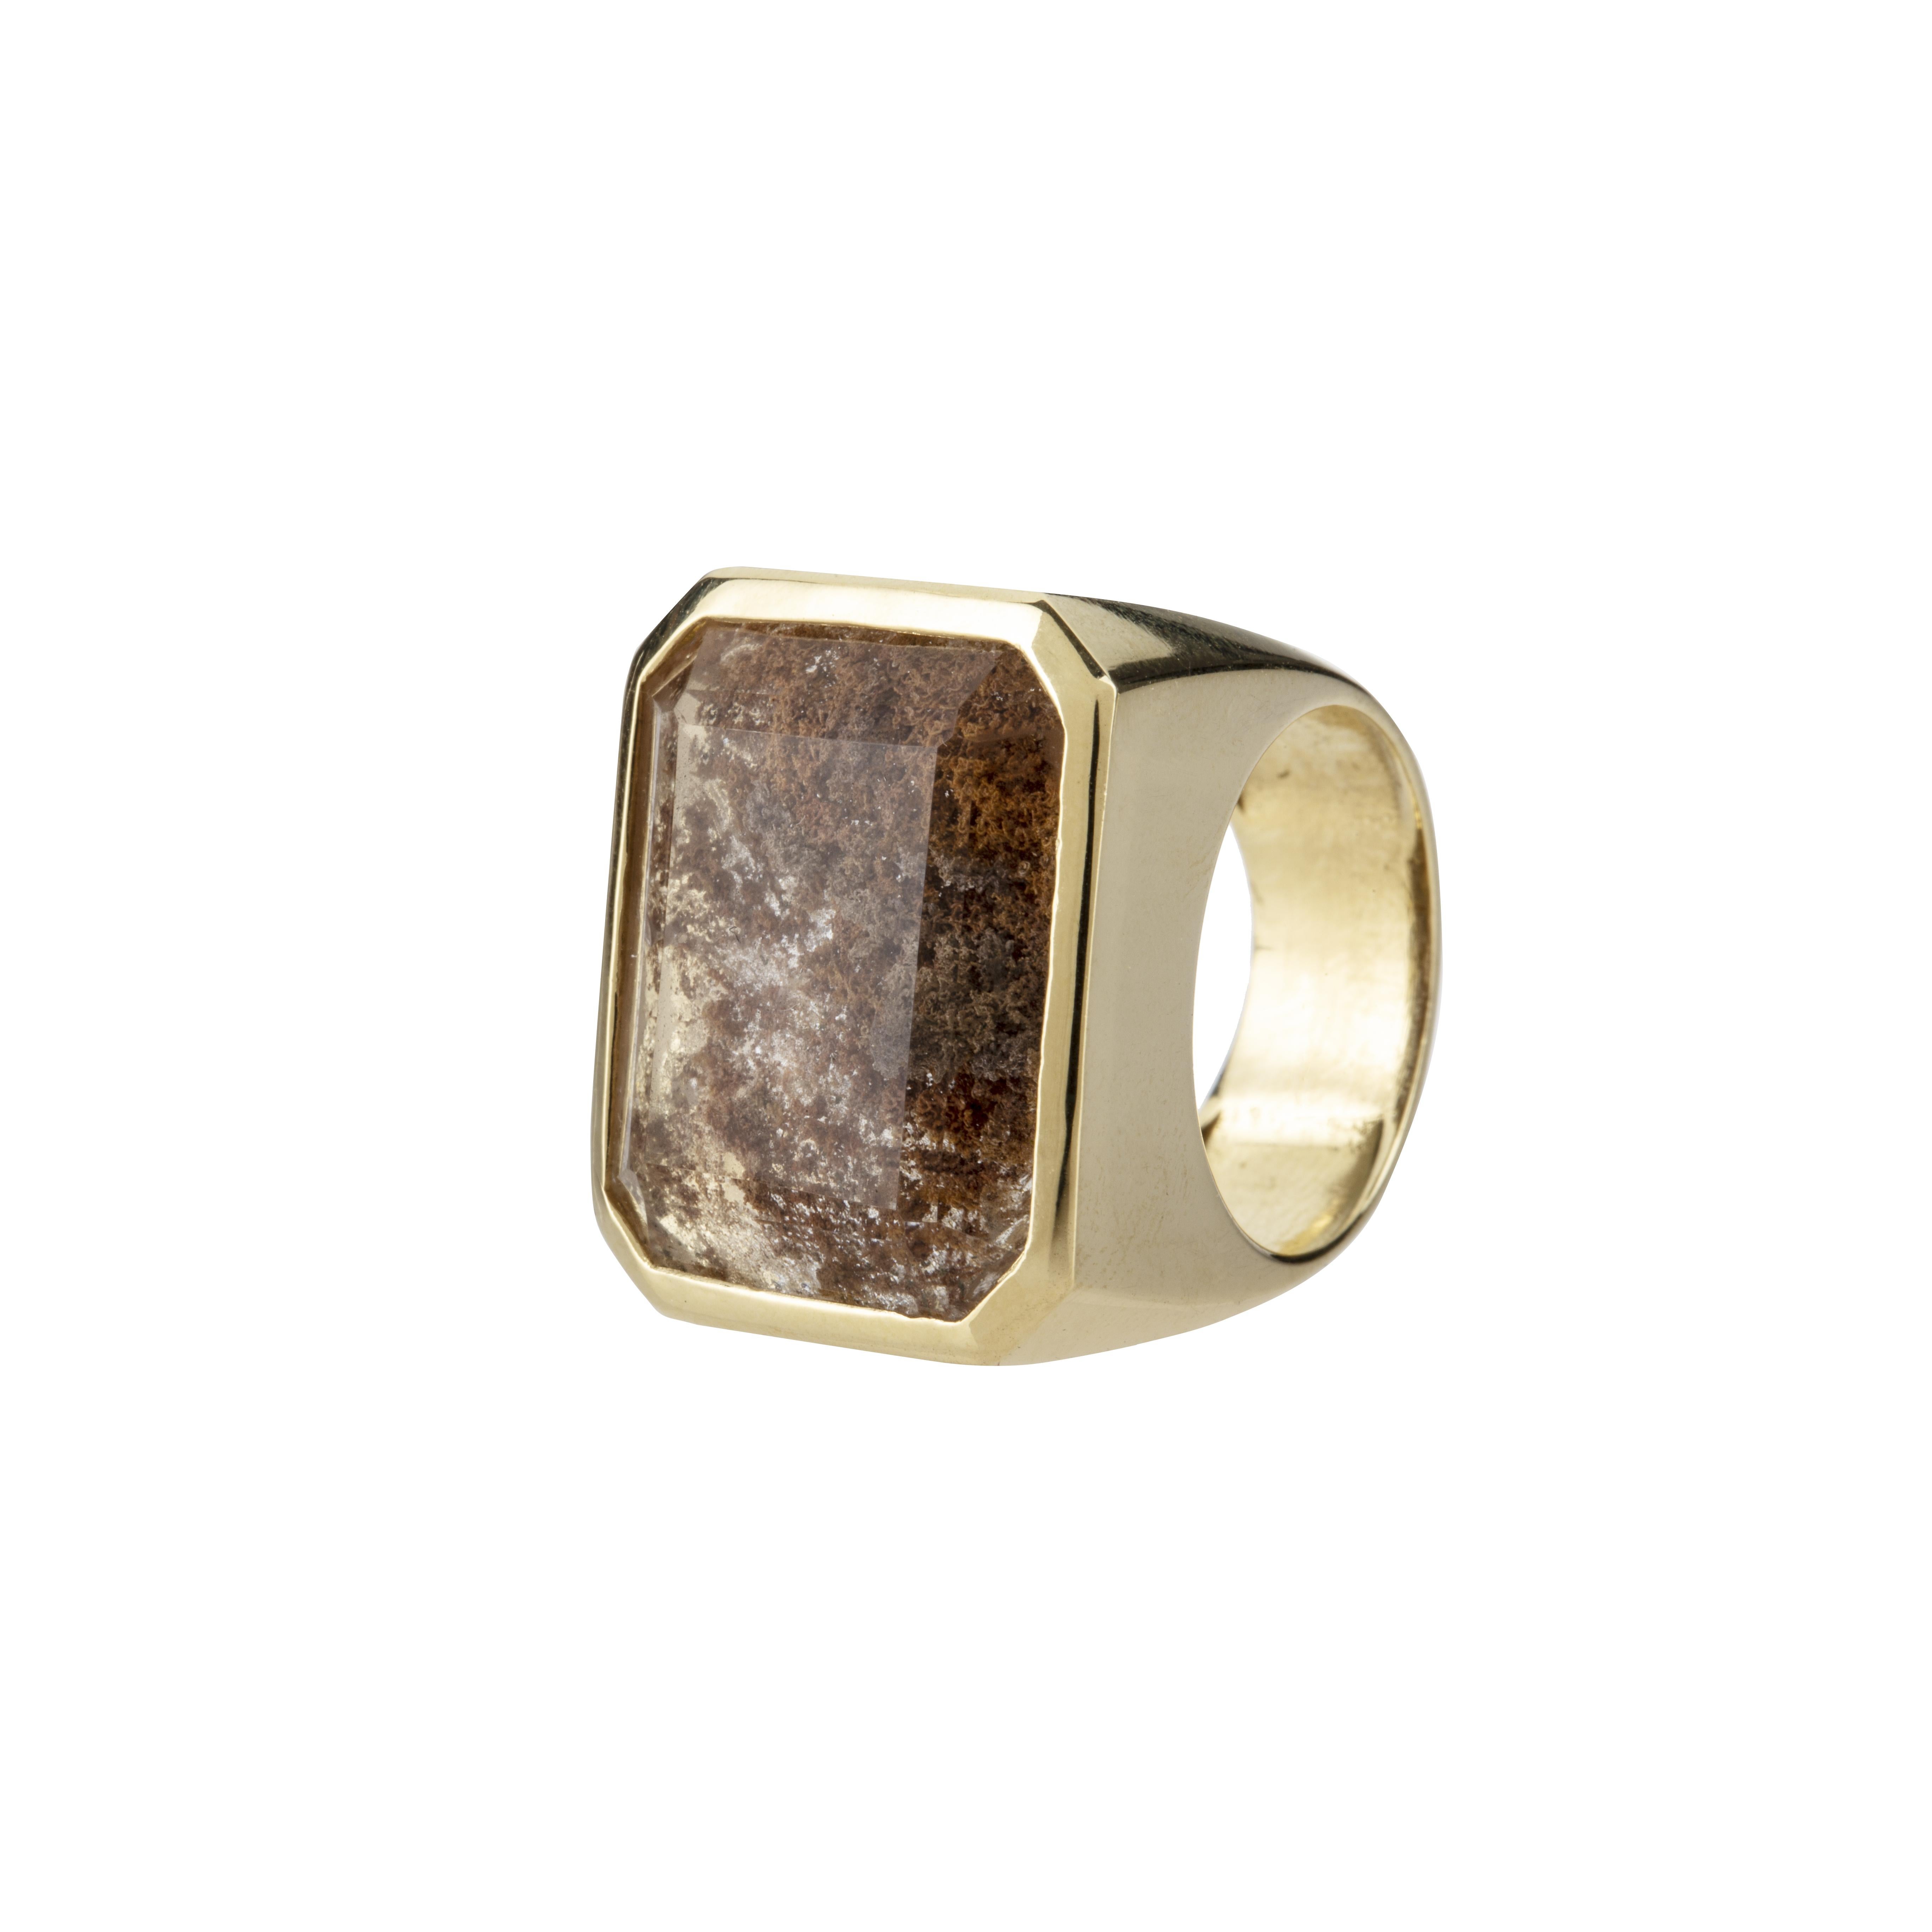 Amazing ring with agate plume that make natural fantastic design in the stone transparency, size 14 eu  gold 18k gr17, agate 5,50cts.
All Giulia Colussi jewelry is new and has never been previously owned or worn. Each item will arrive at your door